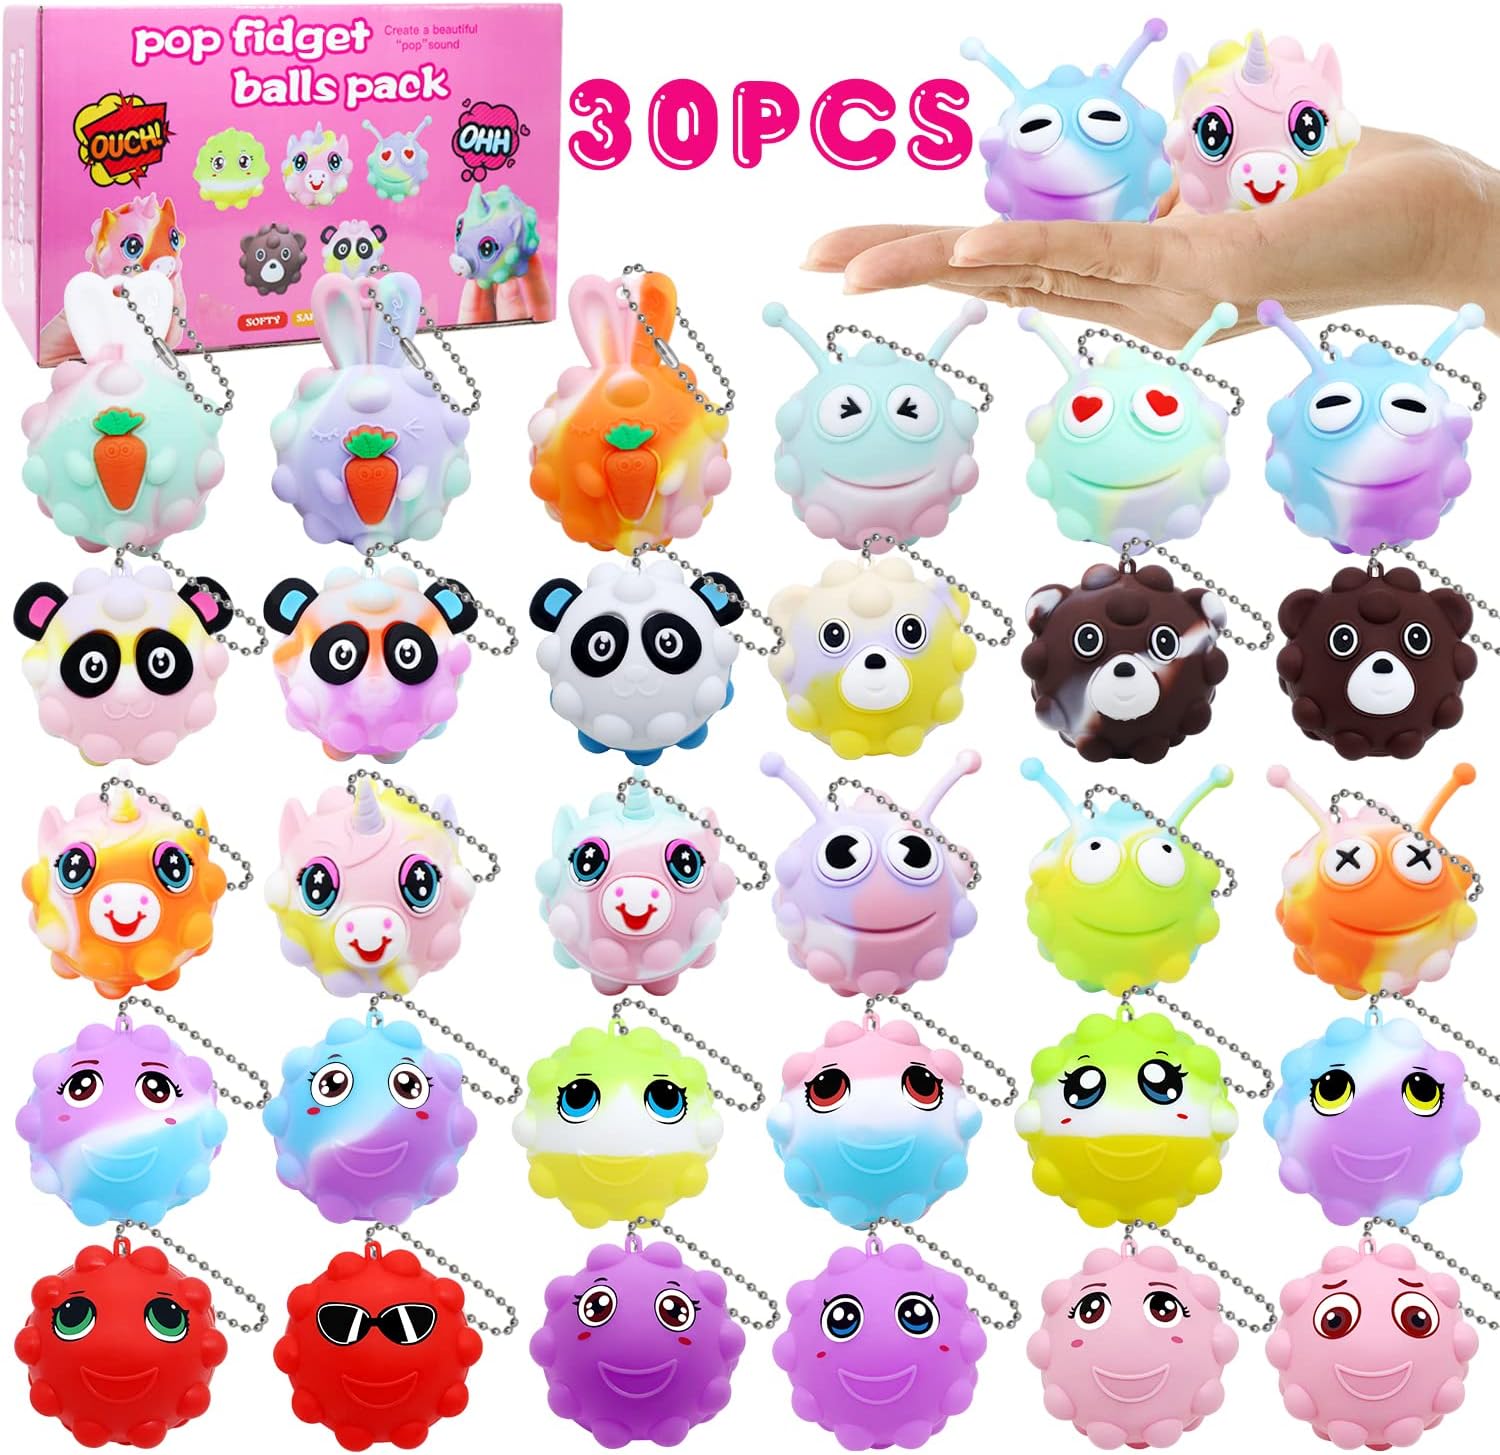 30 Pack Animal Pop Balls Party Favors for Kids,3D Pop Balls Its Fidget Toys,Birthday Gifts for Boys  Girls,Goodie Bag Stuffers,Pinata Stuffers Filler,Carnival Prizes,Treasure Box Toys,Kids Prizes